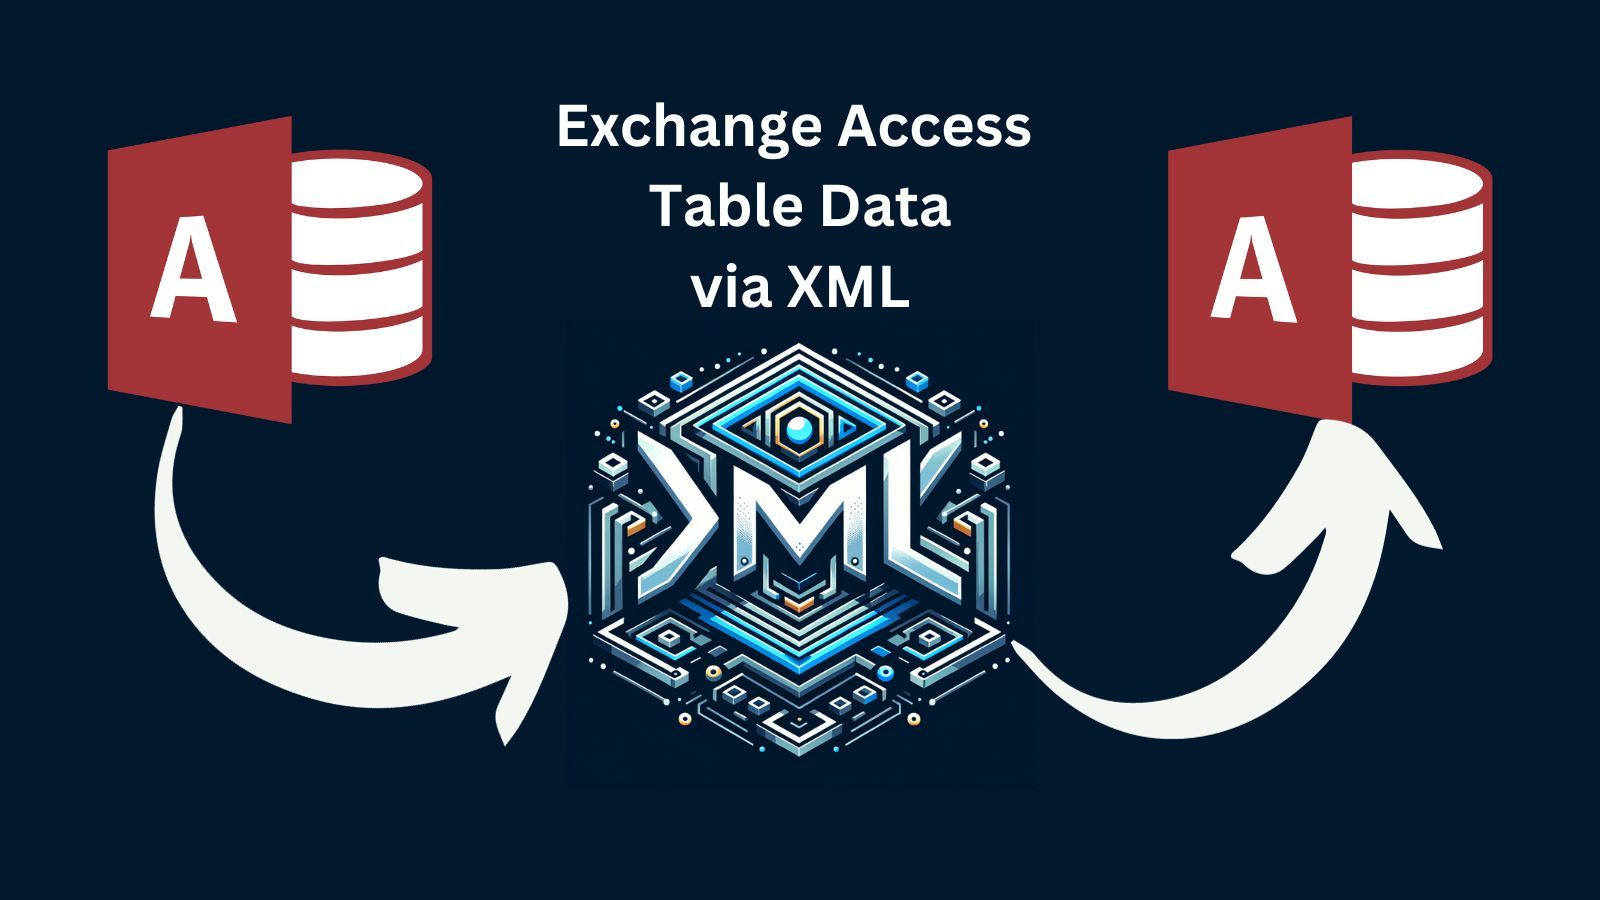 Use XML to Share Access Table Data and Avoid Internet Warnings